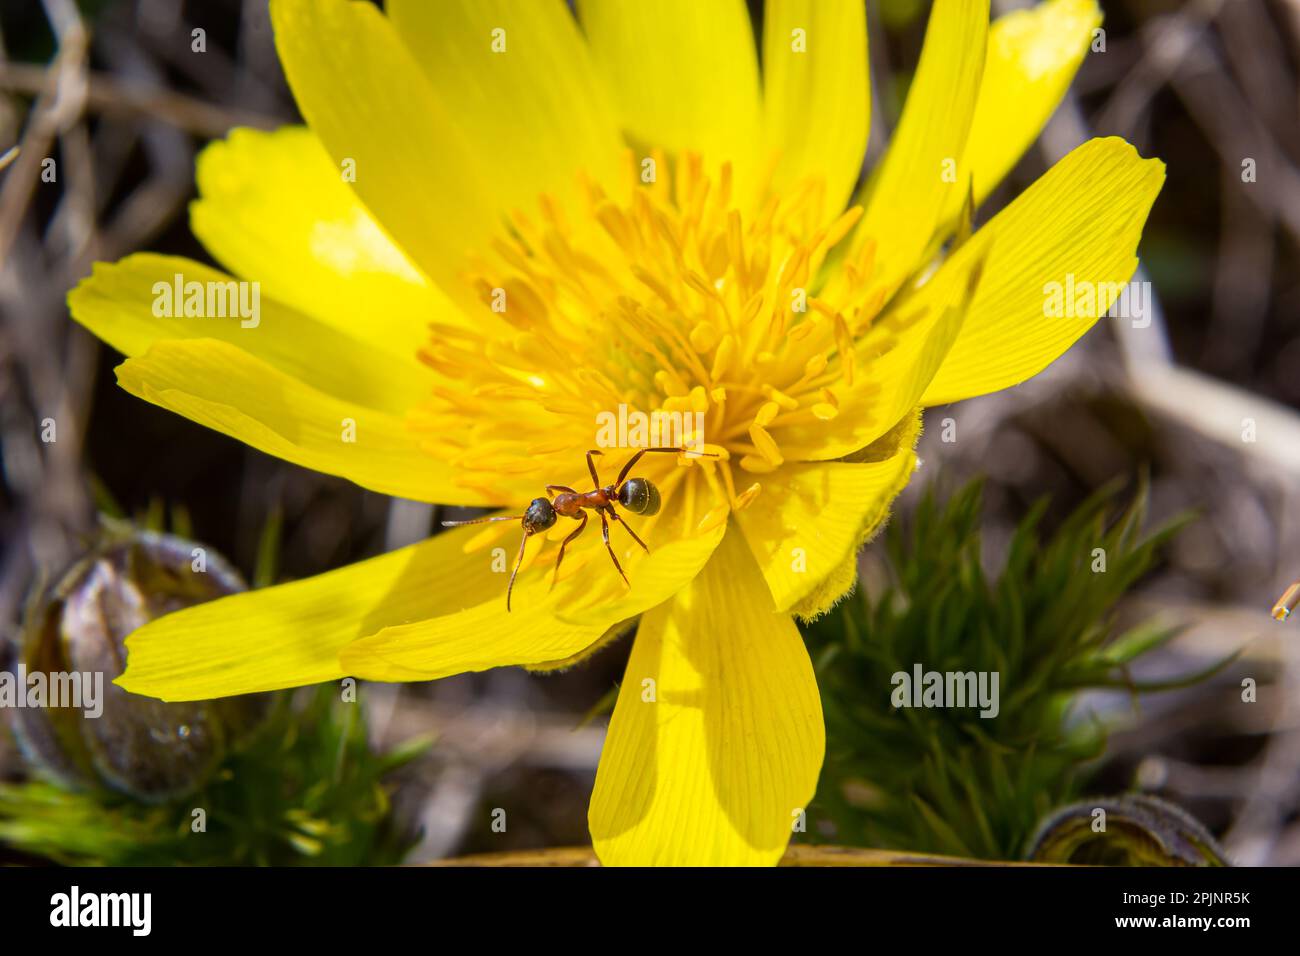 Adonis vernalis is a perennial flowering plant in sping garden. Adonis vernalis is a medicinal plant. Yellow Adonis flowers in natural background. Stock Photo